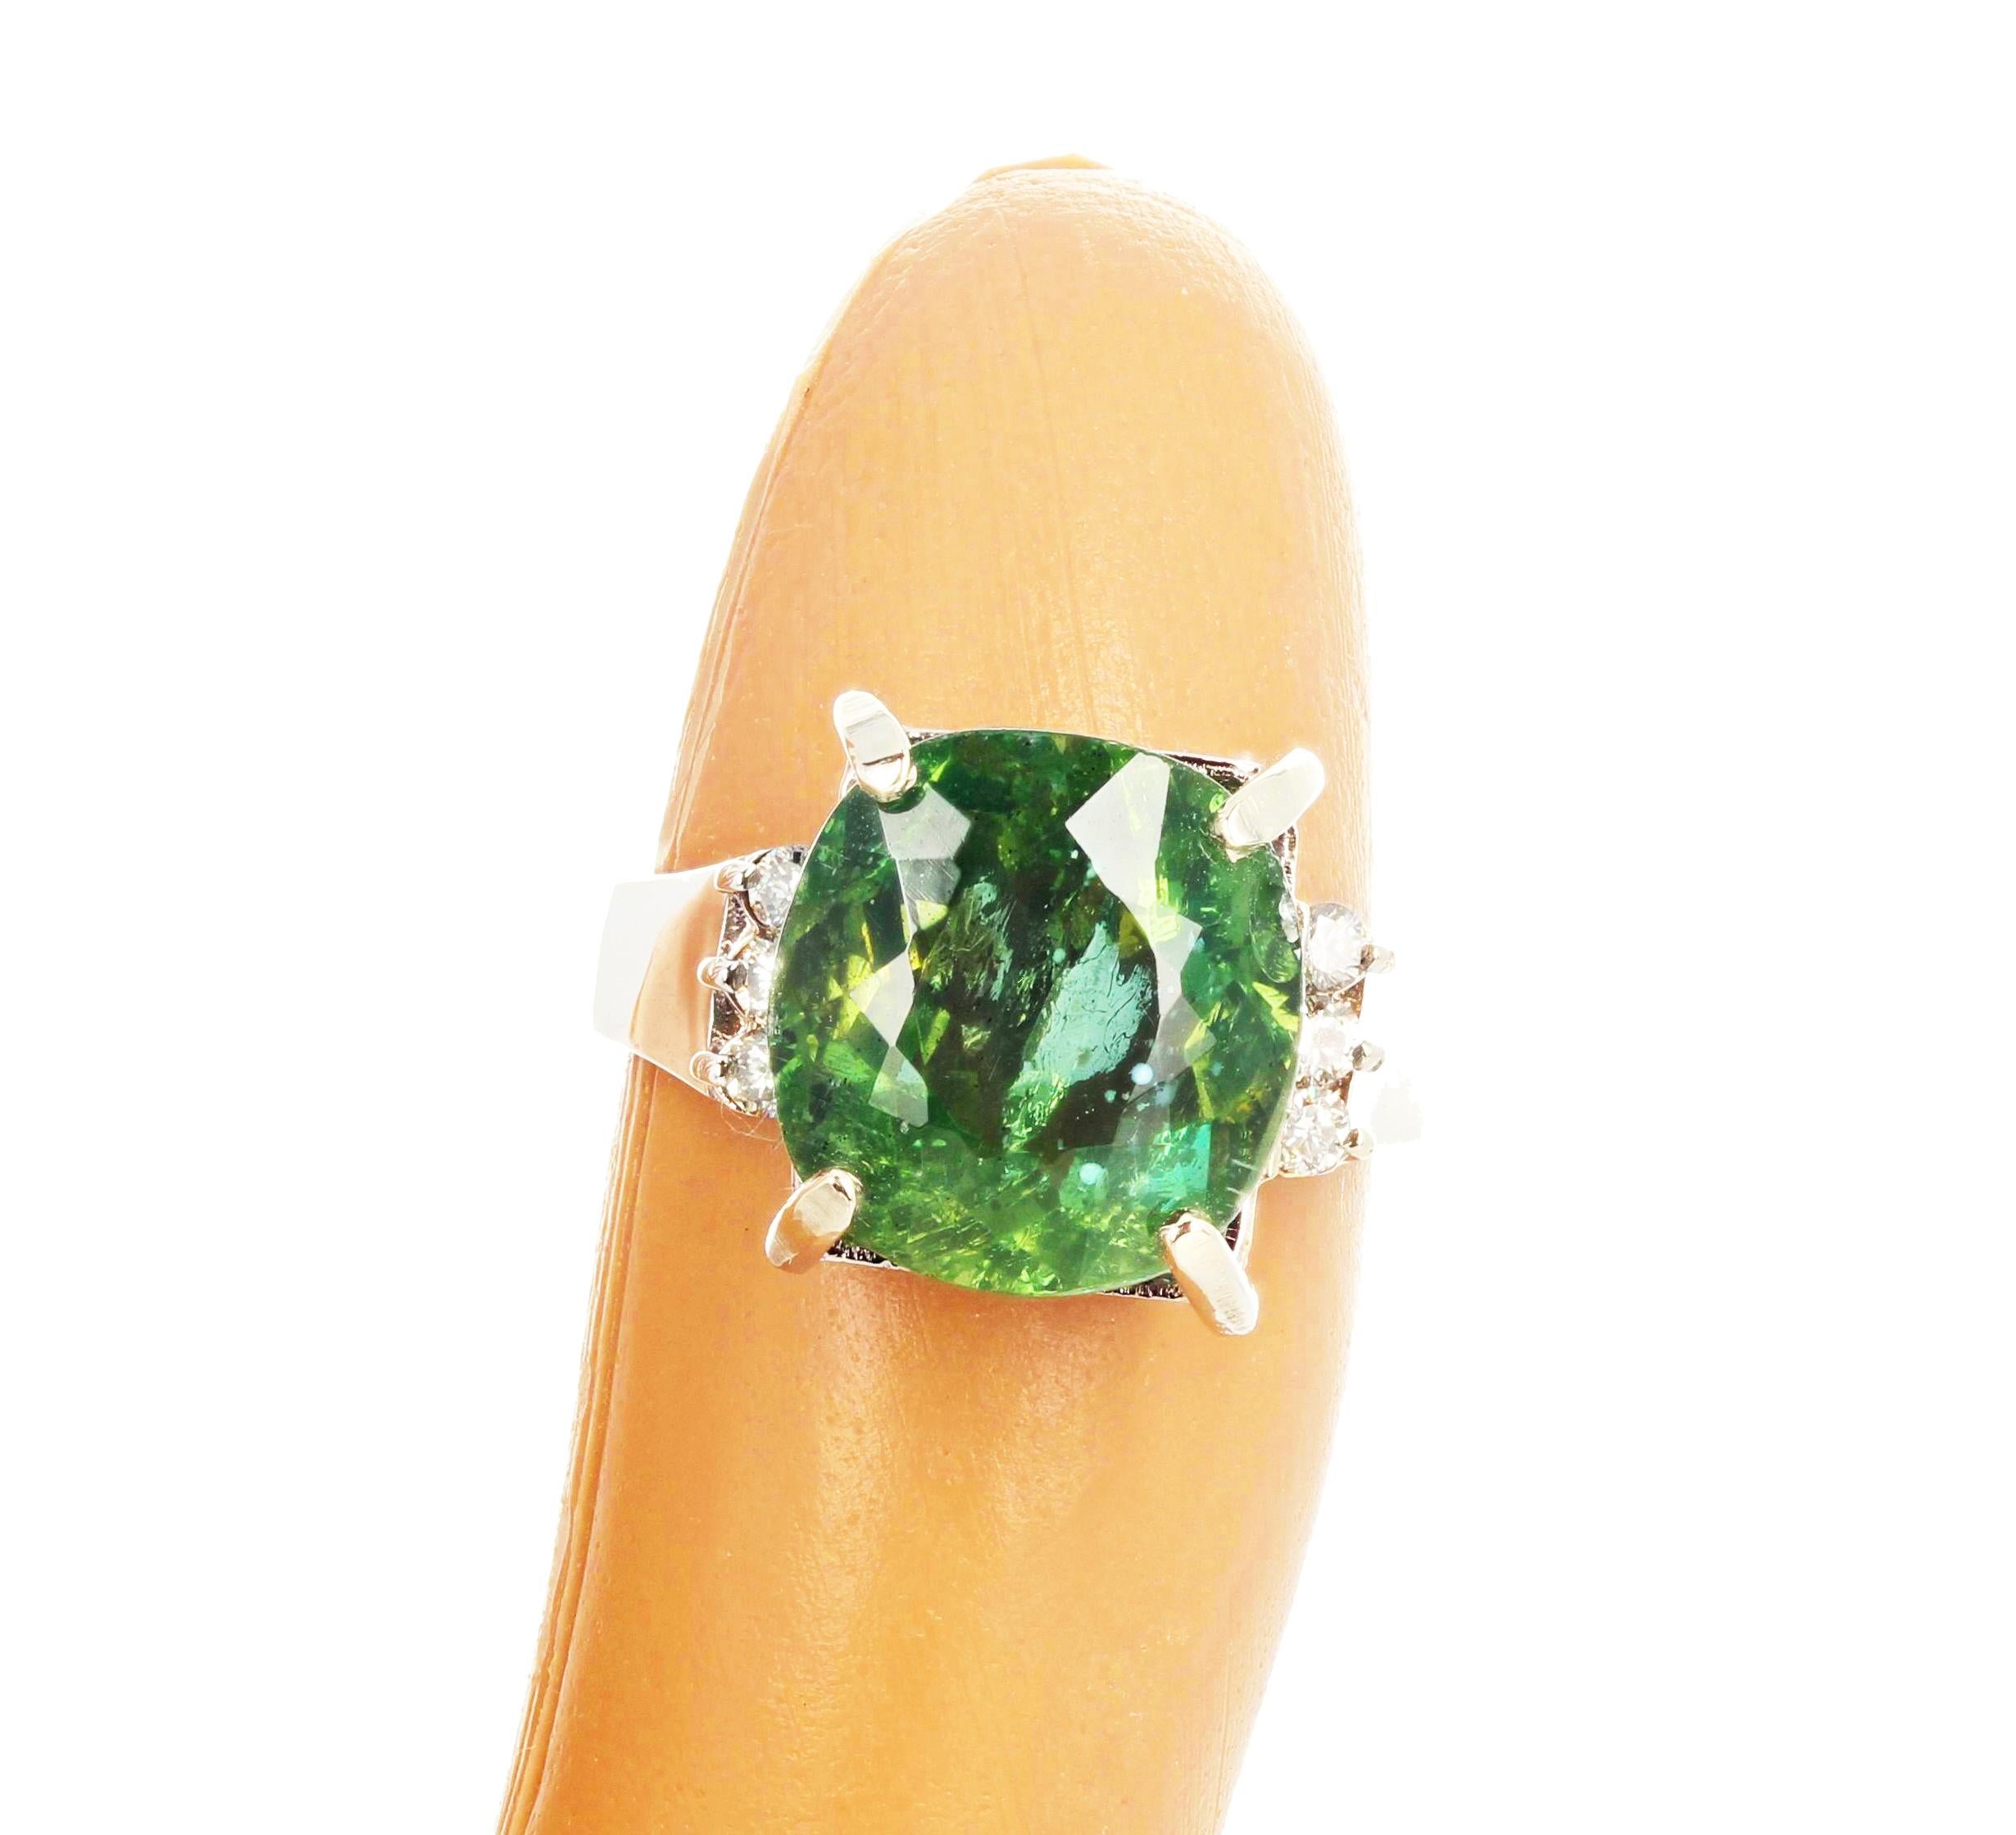 This 8 Carat cushion cut glittering brilliant natural green Madagascar Apatite (12.5mm x 11.9 mm) is enhanced with 6 beautiful sparkling diamonds set in a lovely 14KT white gold ring size 7 (sizable). Spectacular optical effect in the Apatite